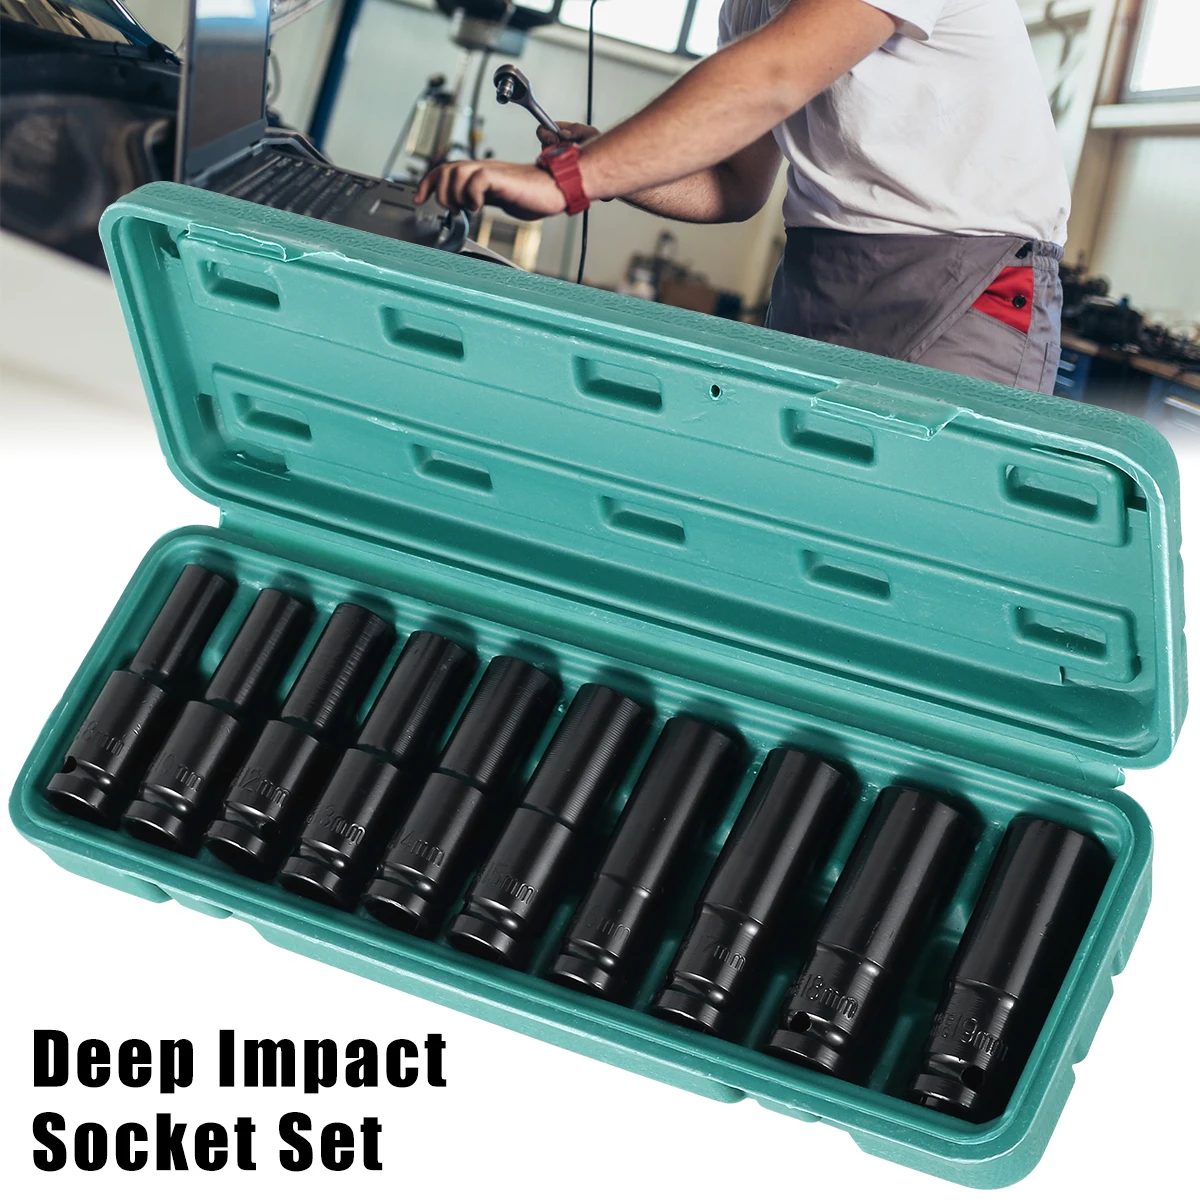 

10 Pcs Deep Impact Socket Set Drive Metric Wrench Socket 8 to 19mm Heavy Duty Pneumatic Wrench Tire Removal Tools Wear-resistant